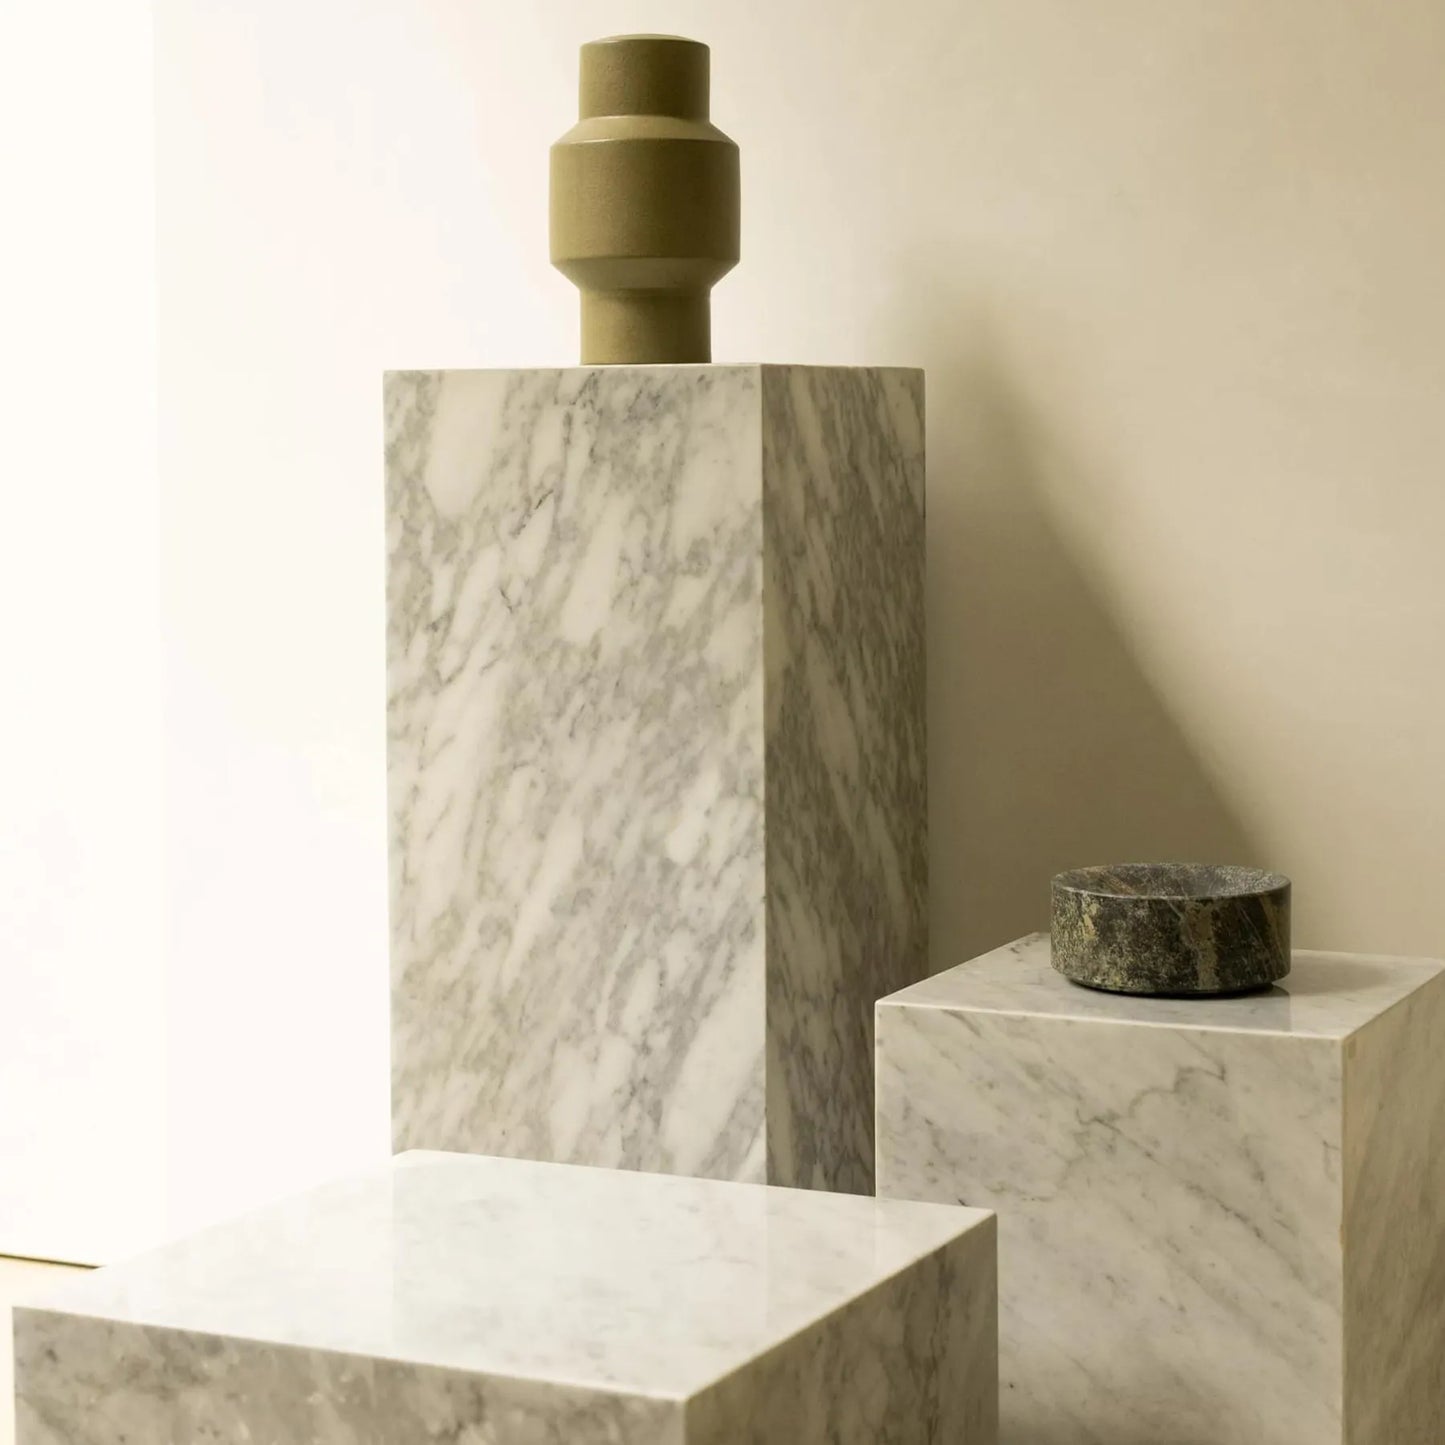 Stage Marble Side Table Tall - Grey Carrara